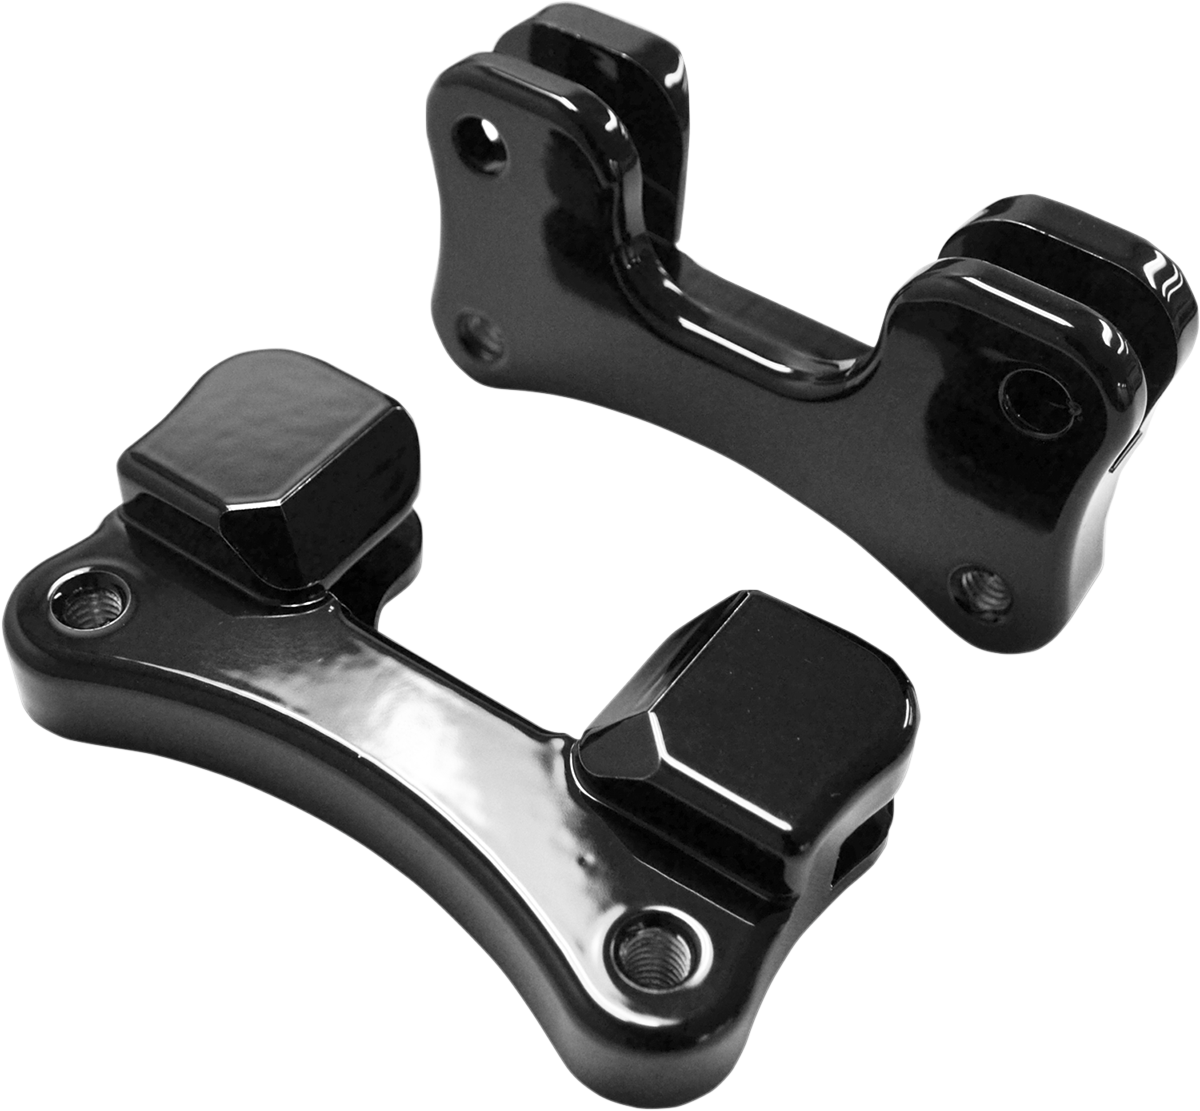 Drag Specialties Black Front Fender Adapters 14-19 Harley Touring Softail FLHX